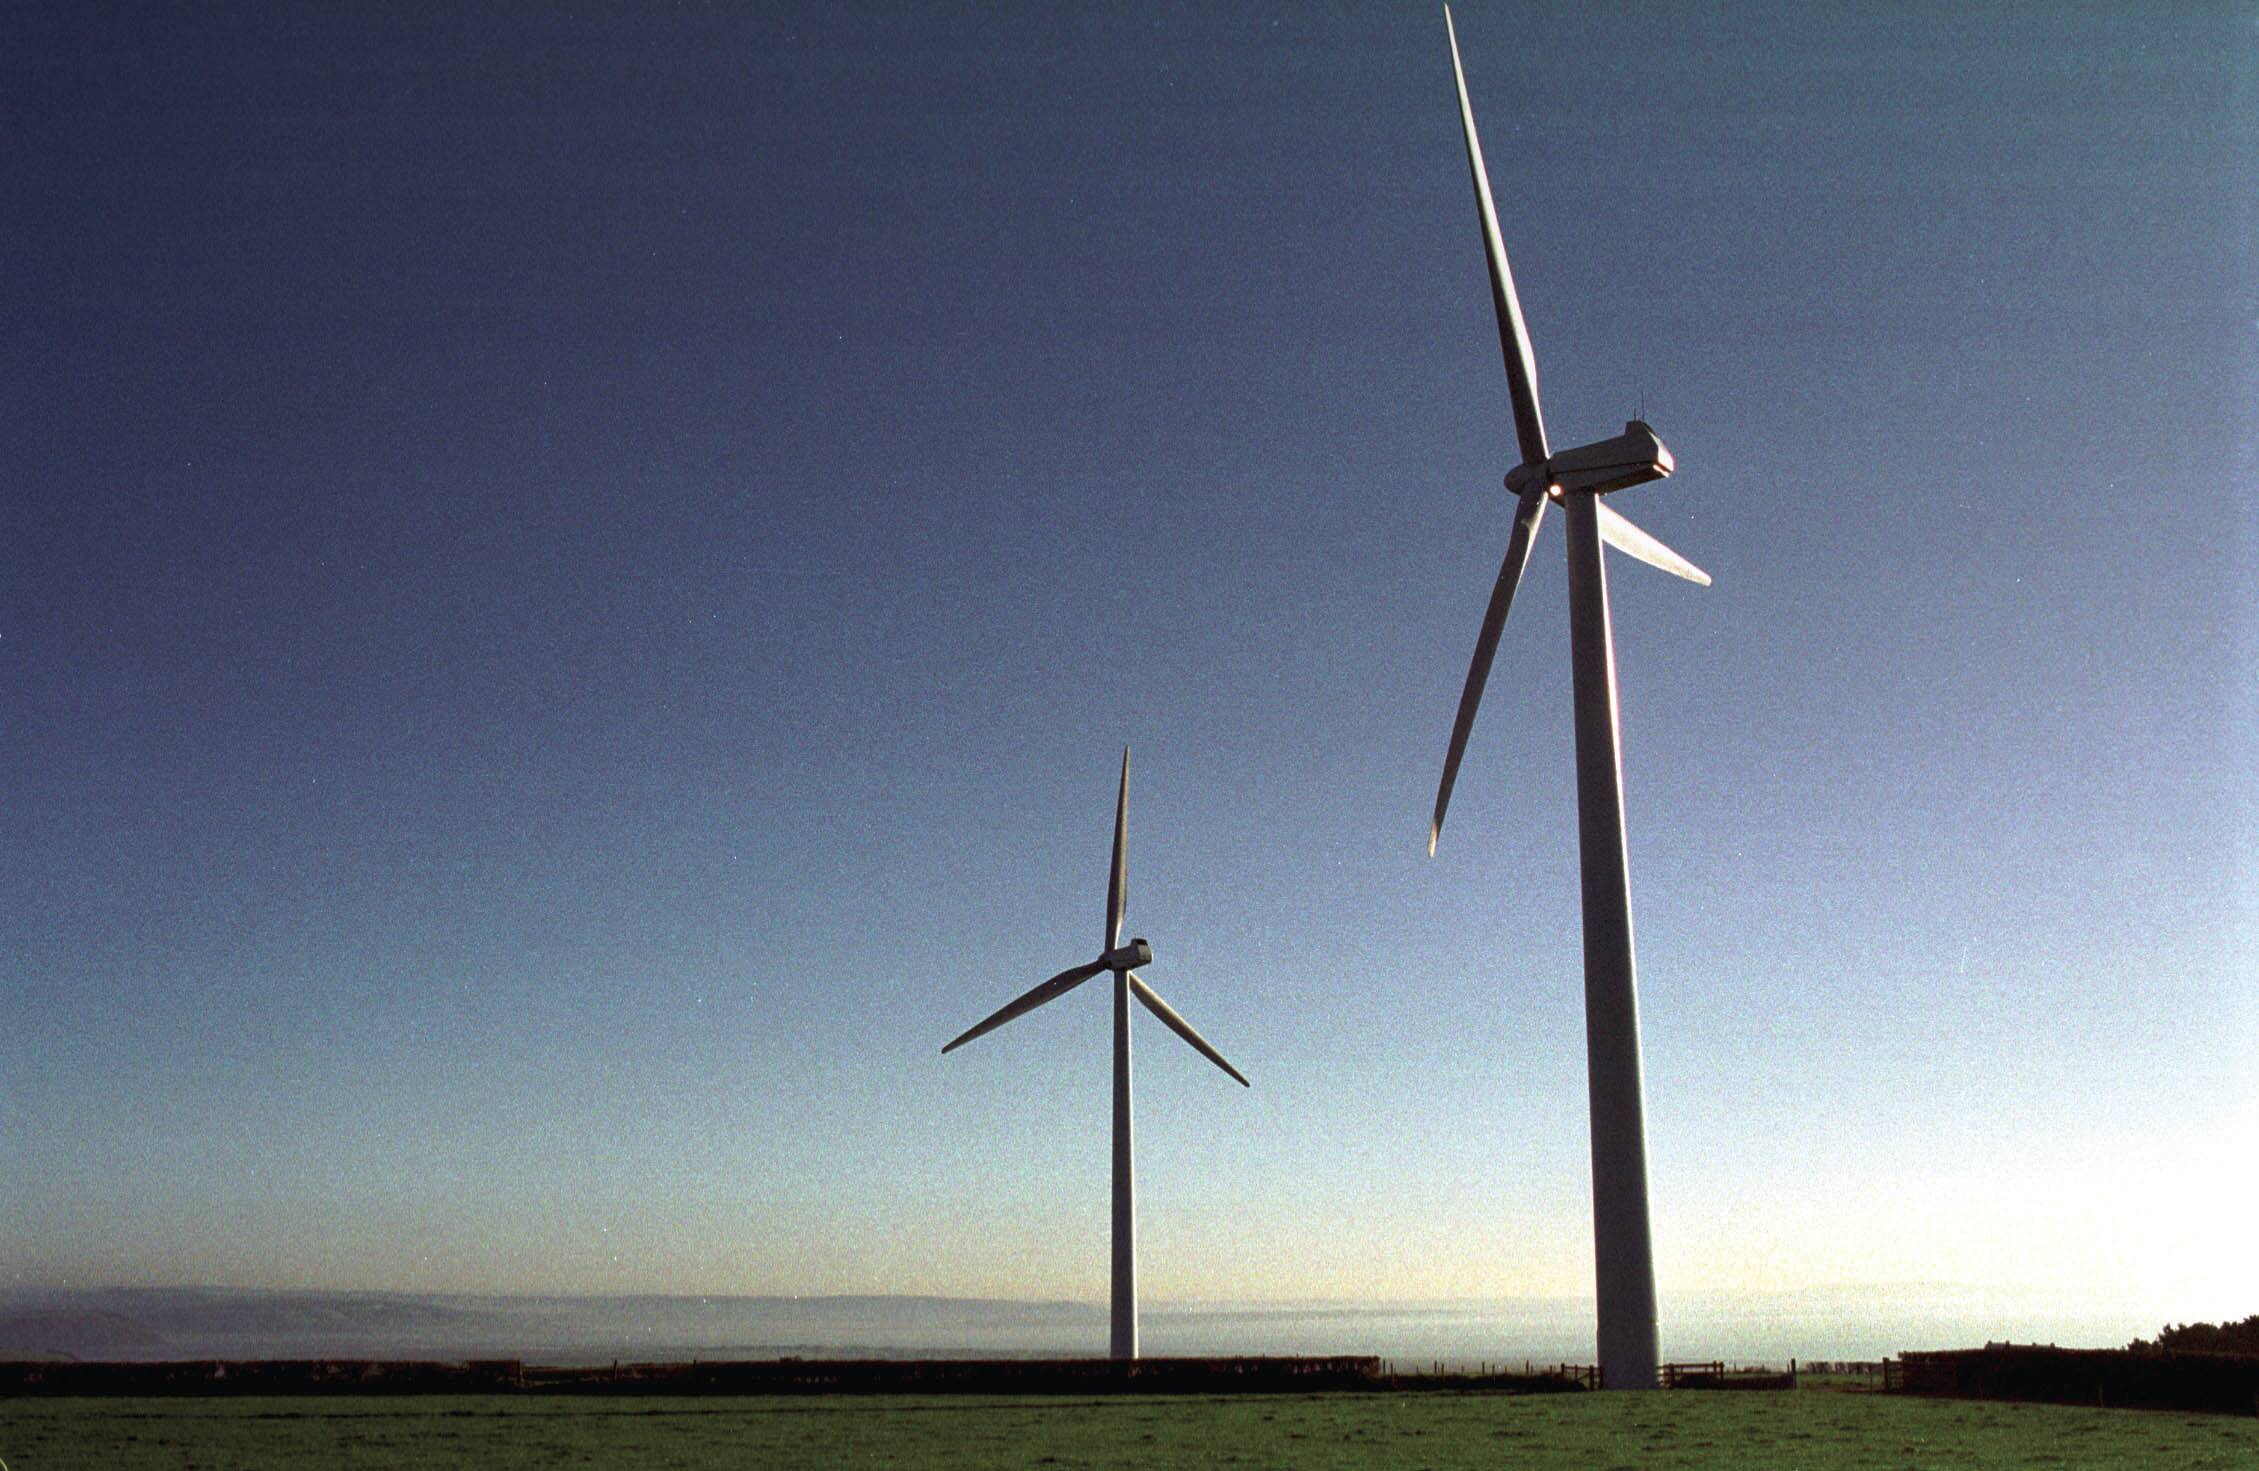 Government to consider tweaks for renewable subsidies